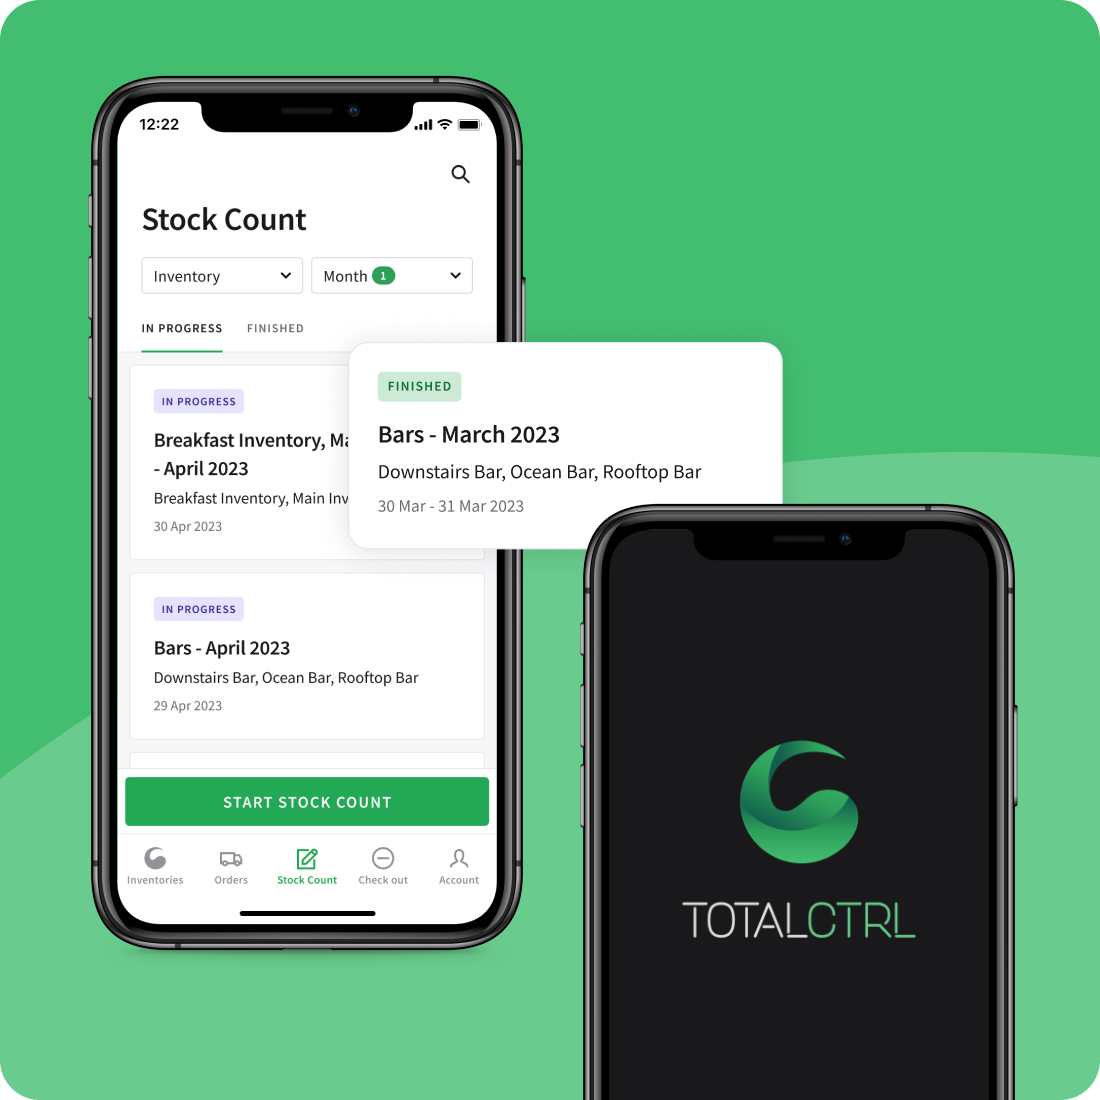 New stock count section in TotalCtrl mobile app